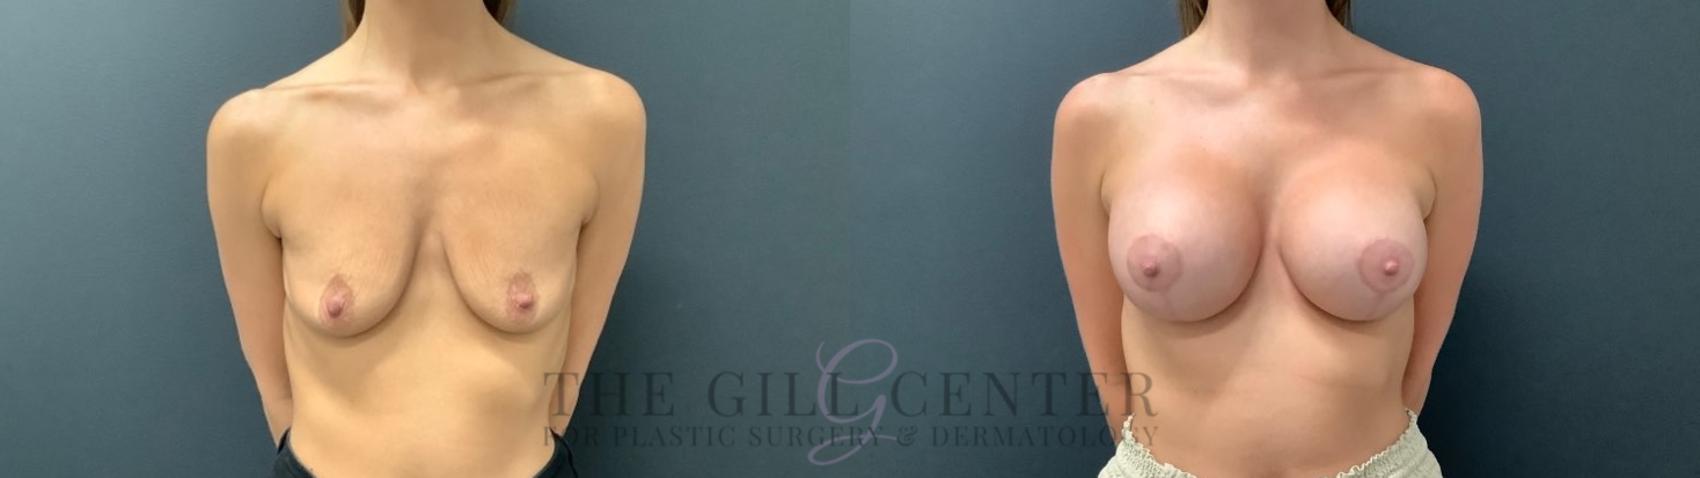 Breast Lift with Implants Case 535 Before & After Front | The Woodlands, TX | The Gill Center for Plastic Surgery and Dermatology